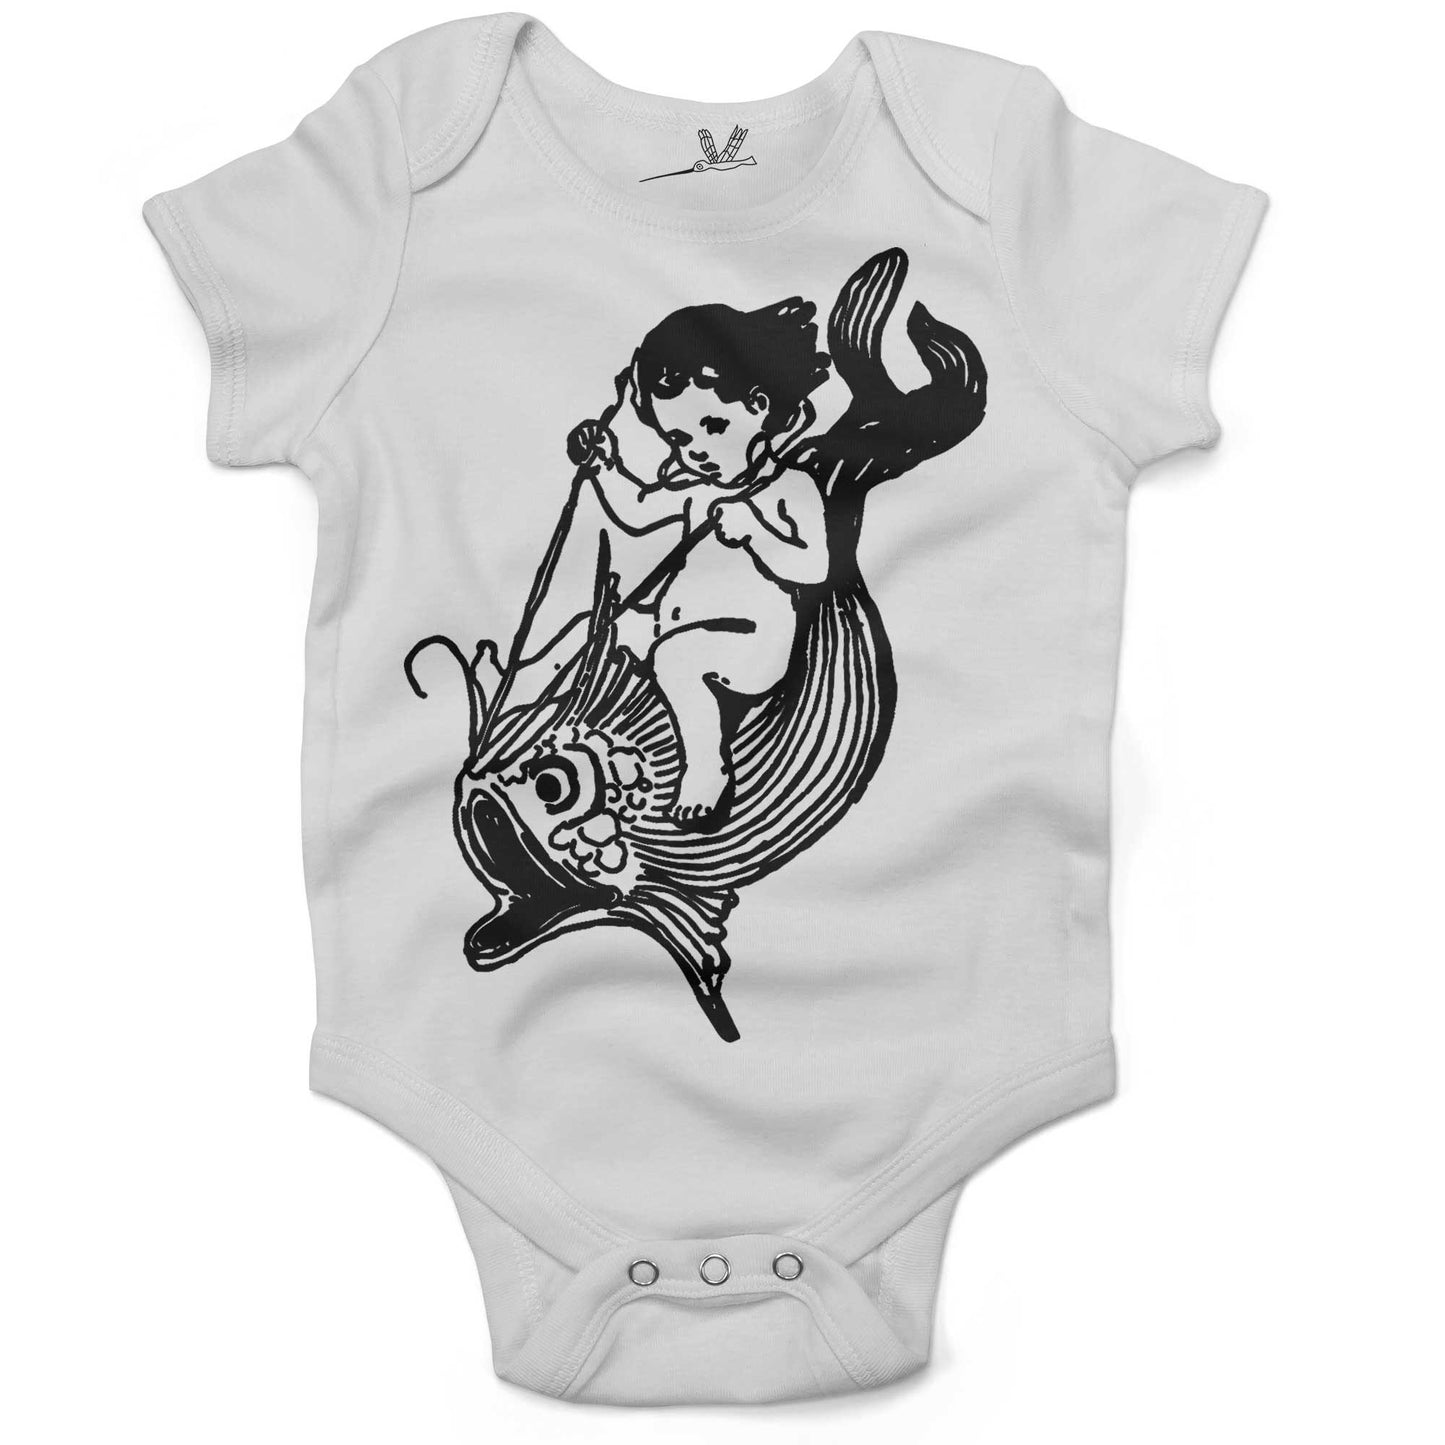 Water Baby Riding A Giant Fish Infant Bodysuit or Raglan Tee-White-3-6 months